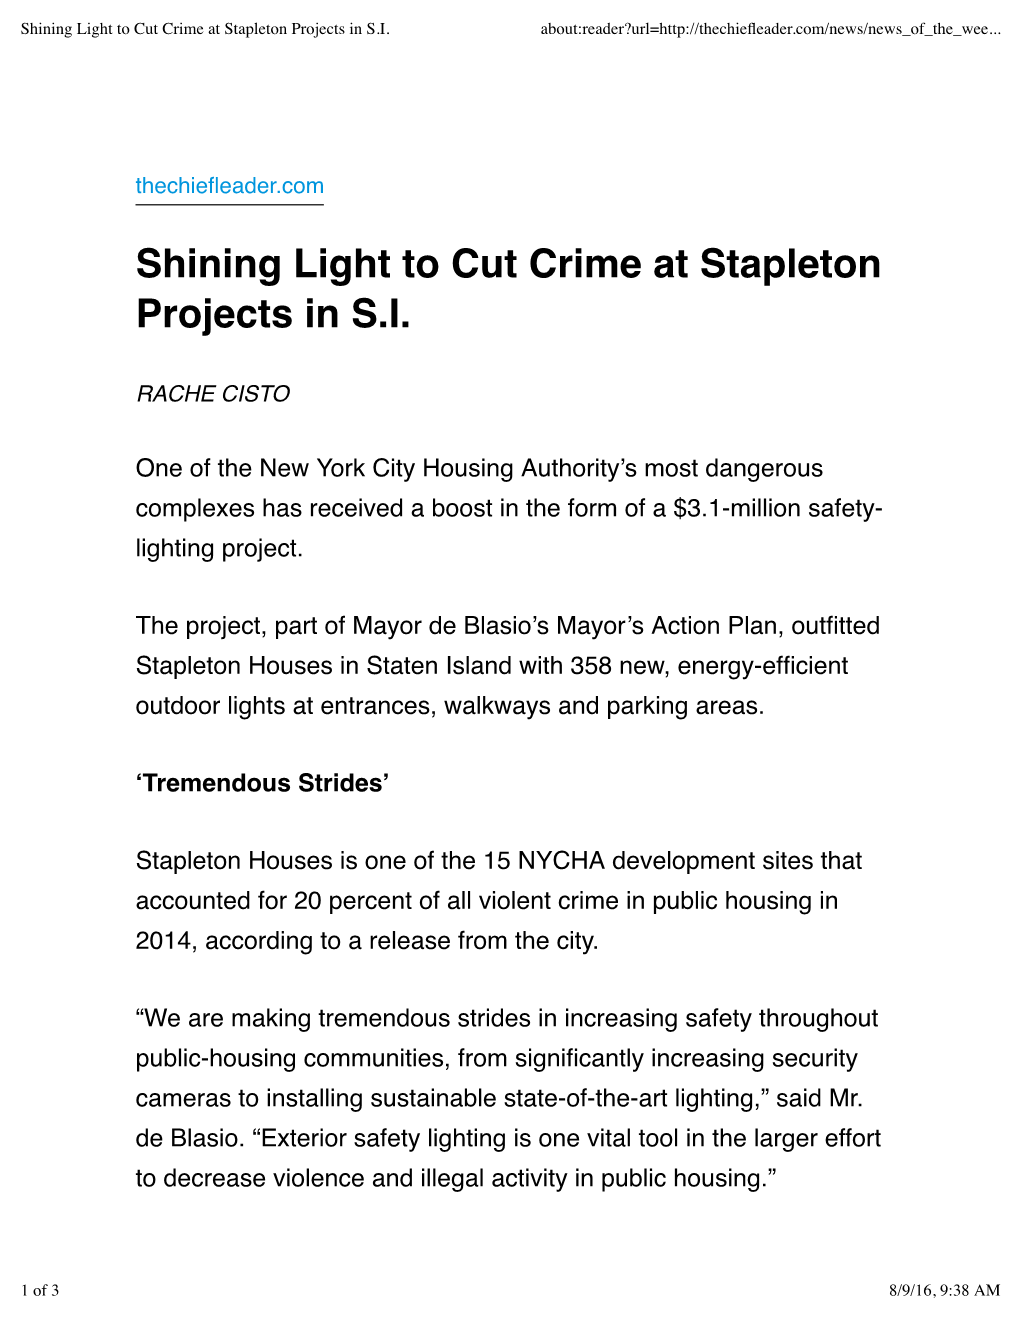 Shining Light to Cut Crime at Stapleton Projects in S.I. About:Reader?Url=